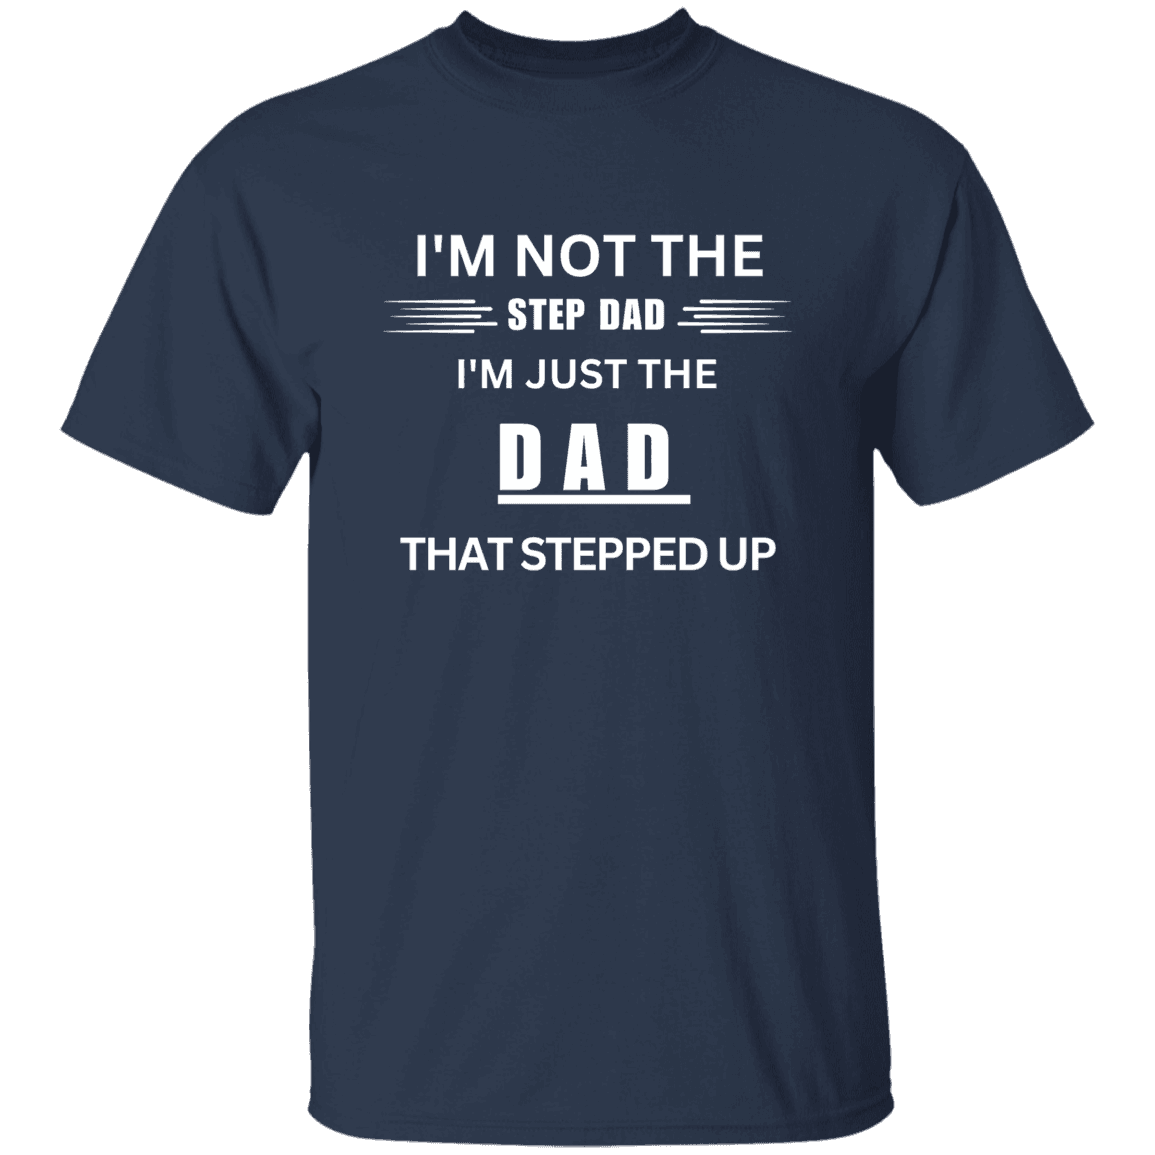 Front of the navy Stepped Up Dad t-shirt. Material is heavyweight 100% cotton in a classic unisex t-shirt style. Printed in white letters on the chest is the phrase: "I'm not the Step Dad, I'm just the DAD that stepped up"